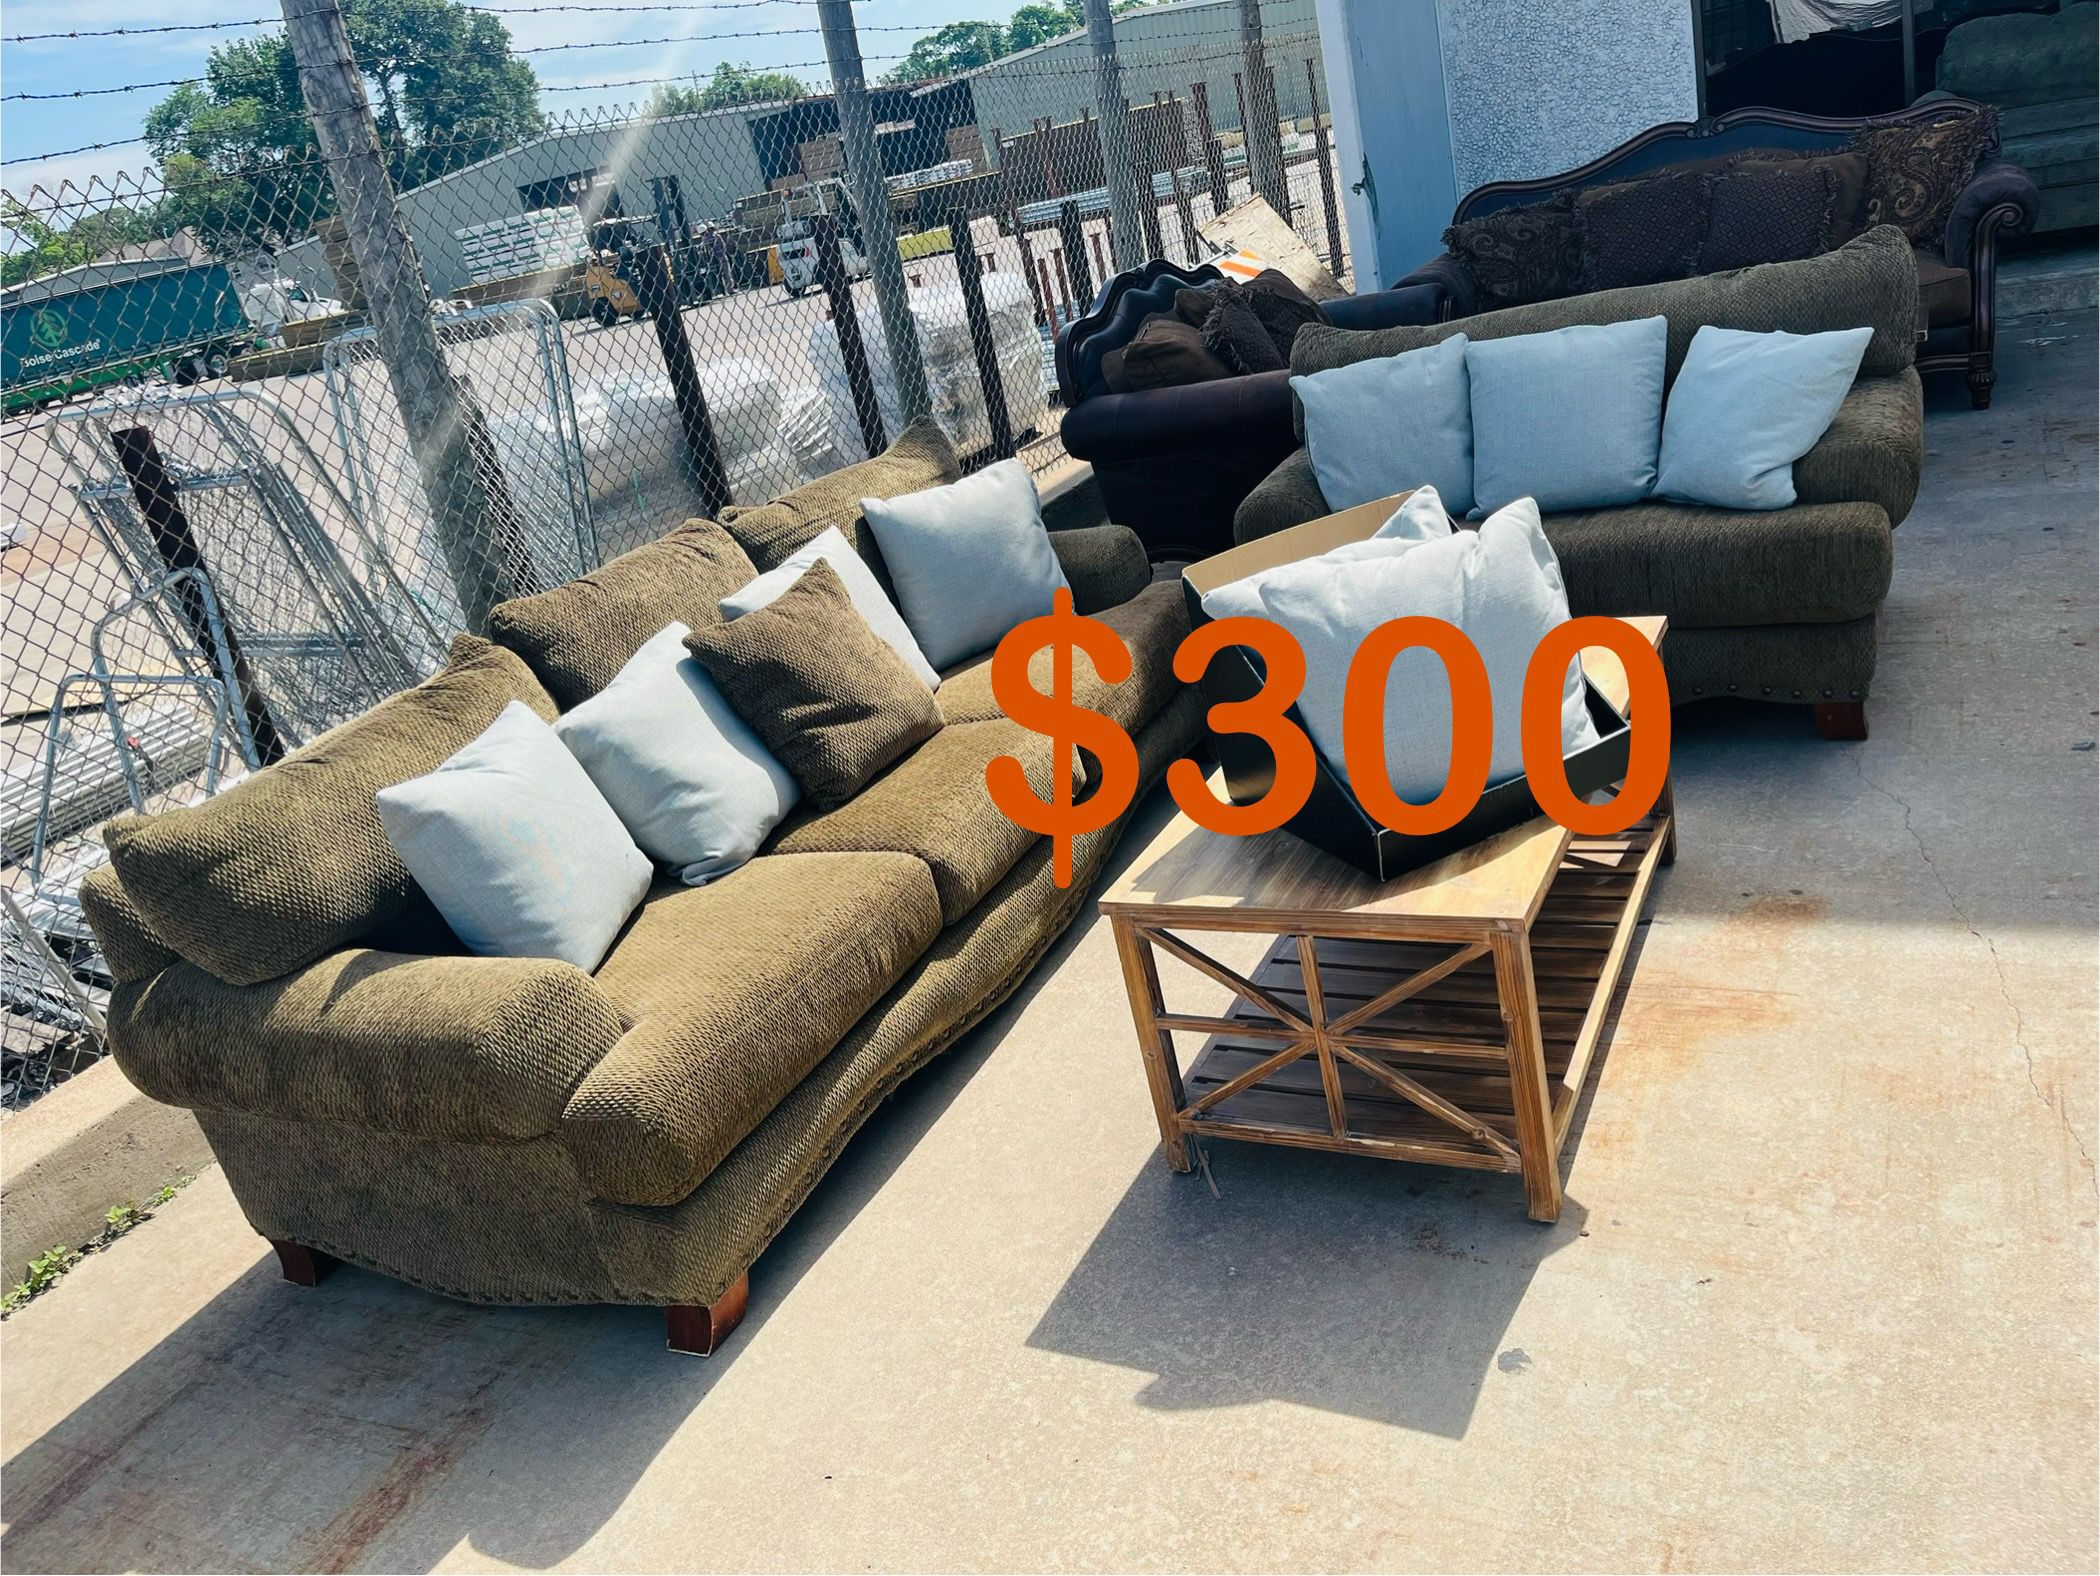 sofa sets, sectionals, recliners and armchairs🦋